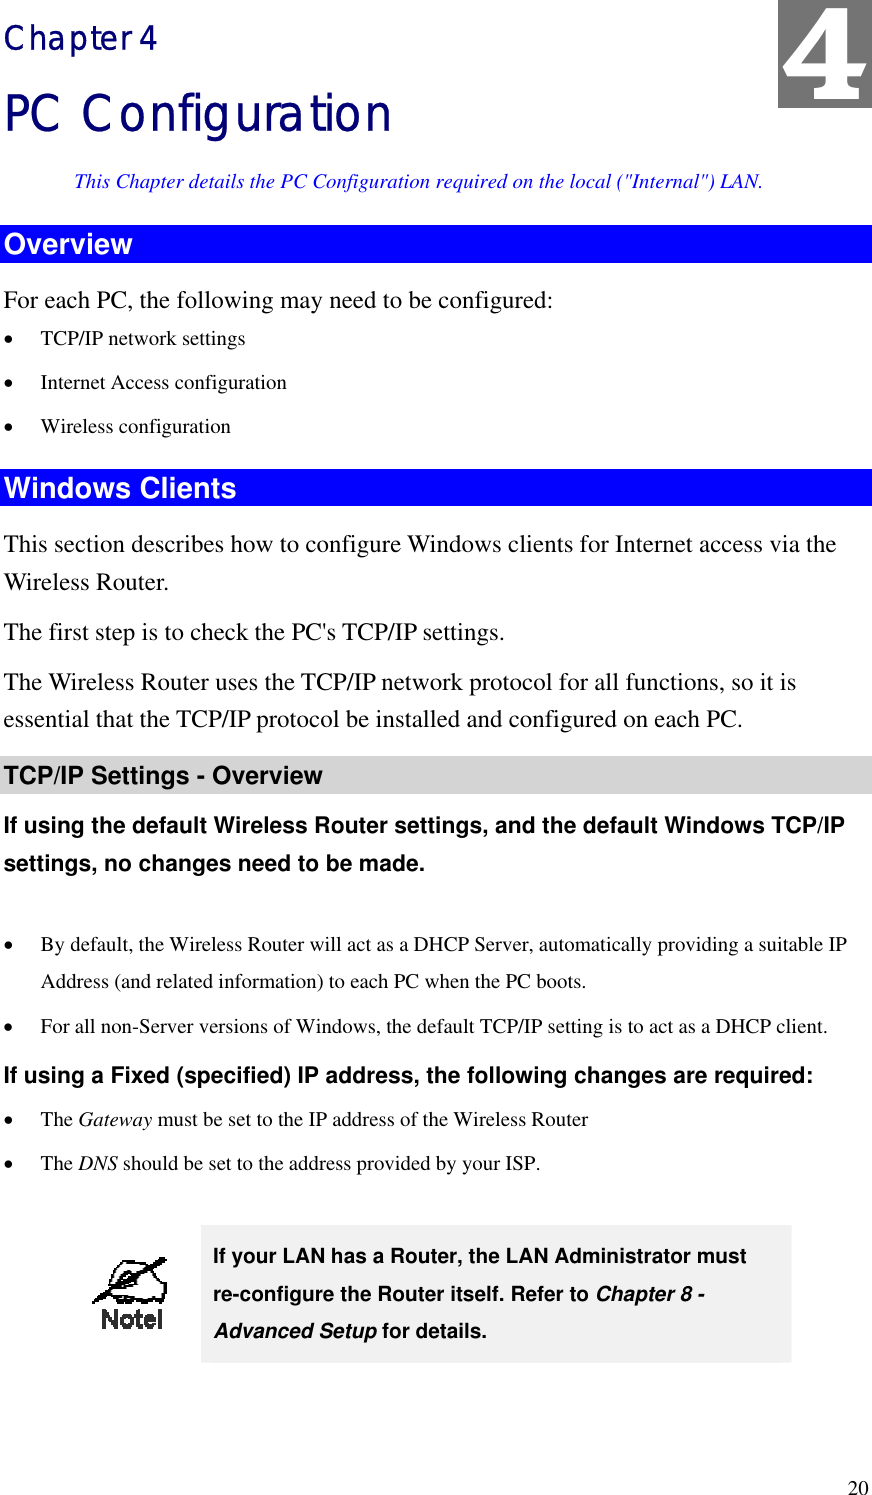 4 Chapter 4 PC Configuration This Chapter details the PC Configuration required on the local (&quot;Internal&quot;) LAN. Overview For each PC, the following may need to be configured: •  TCP/IP network settings •  Internet Access configuration •  Wireless configuration Windows Clients This section describes how to configure Windows clients for Internet access via the Wireless Router. The first step is to check the PC&apos;s TCP/IP settings.   The Wireless Router uses the TCP/IP network protocol for all functions, so it is essential that the TCP/IP protocol be installed and configured on each PC. TCP/IP Settings - Overview If using the default Wireless Router settings, and the default Windows TCP/IP settings, no changes need to be made.  •  By default, the Wireless Router will act as a DHCP Server, automatically providing a suitable IP Address (and related information) to each PC when the PC boots. •  For all non-Server versions of Windows, the default TCP/IP setting is to act as a DHCP client. If using a Fixed (specified) IP address, the following changes are required: •  The Gateway must be set to the IP address of the Wireless Router •  The DNS should be set to the address provided by your ISP.   If your LAN has a Router, the LAN Administrator must re-configure the Router itself. Refer to Chapter 8 - Advanced Setup for details.   20 